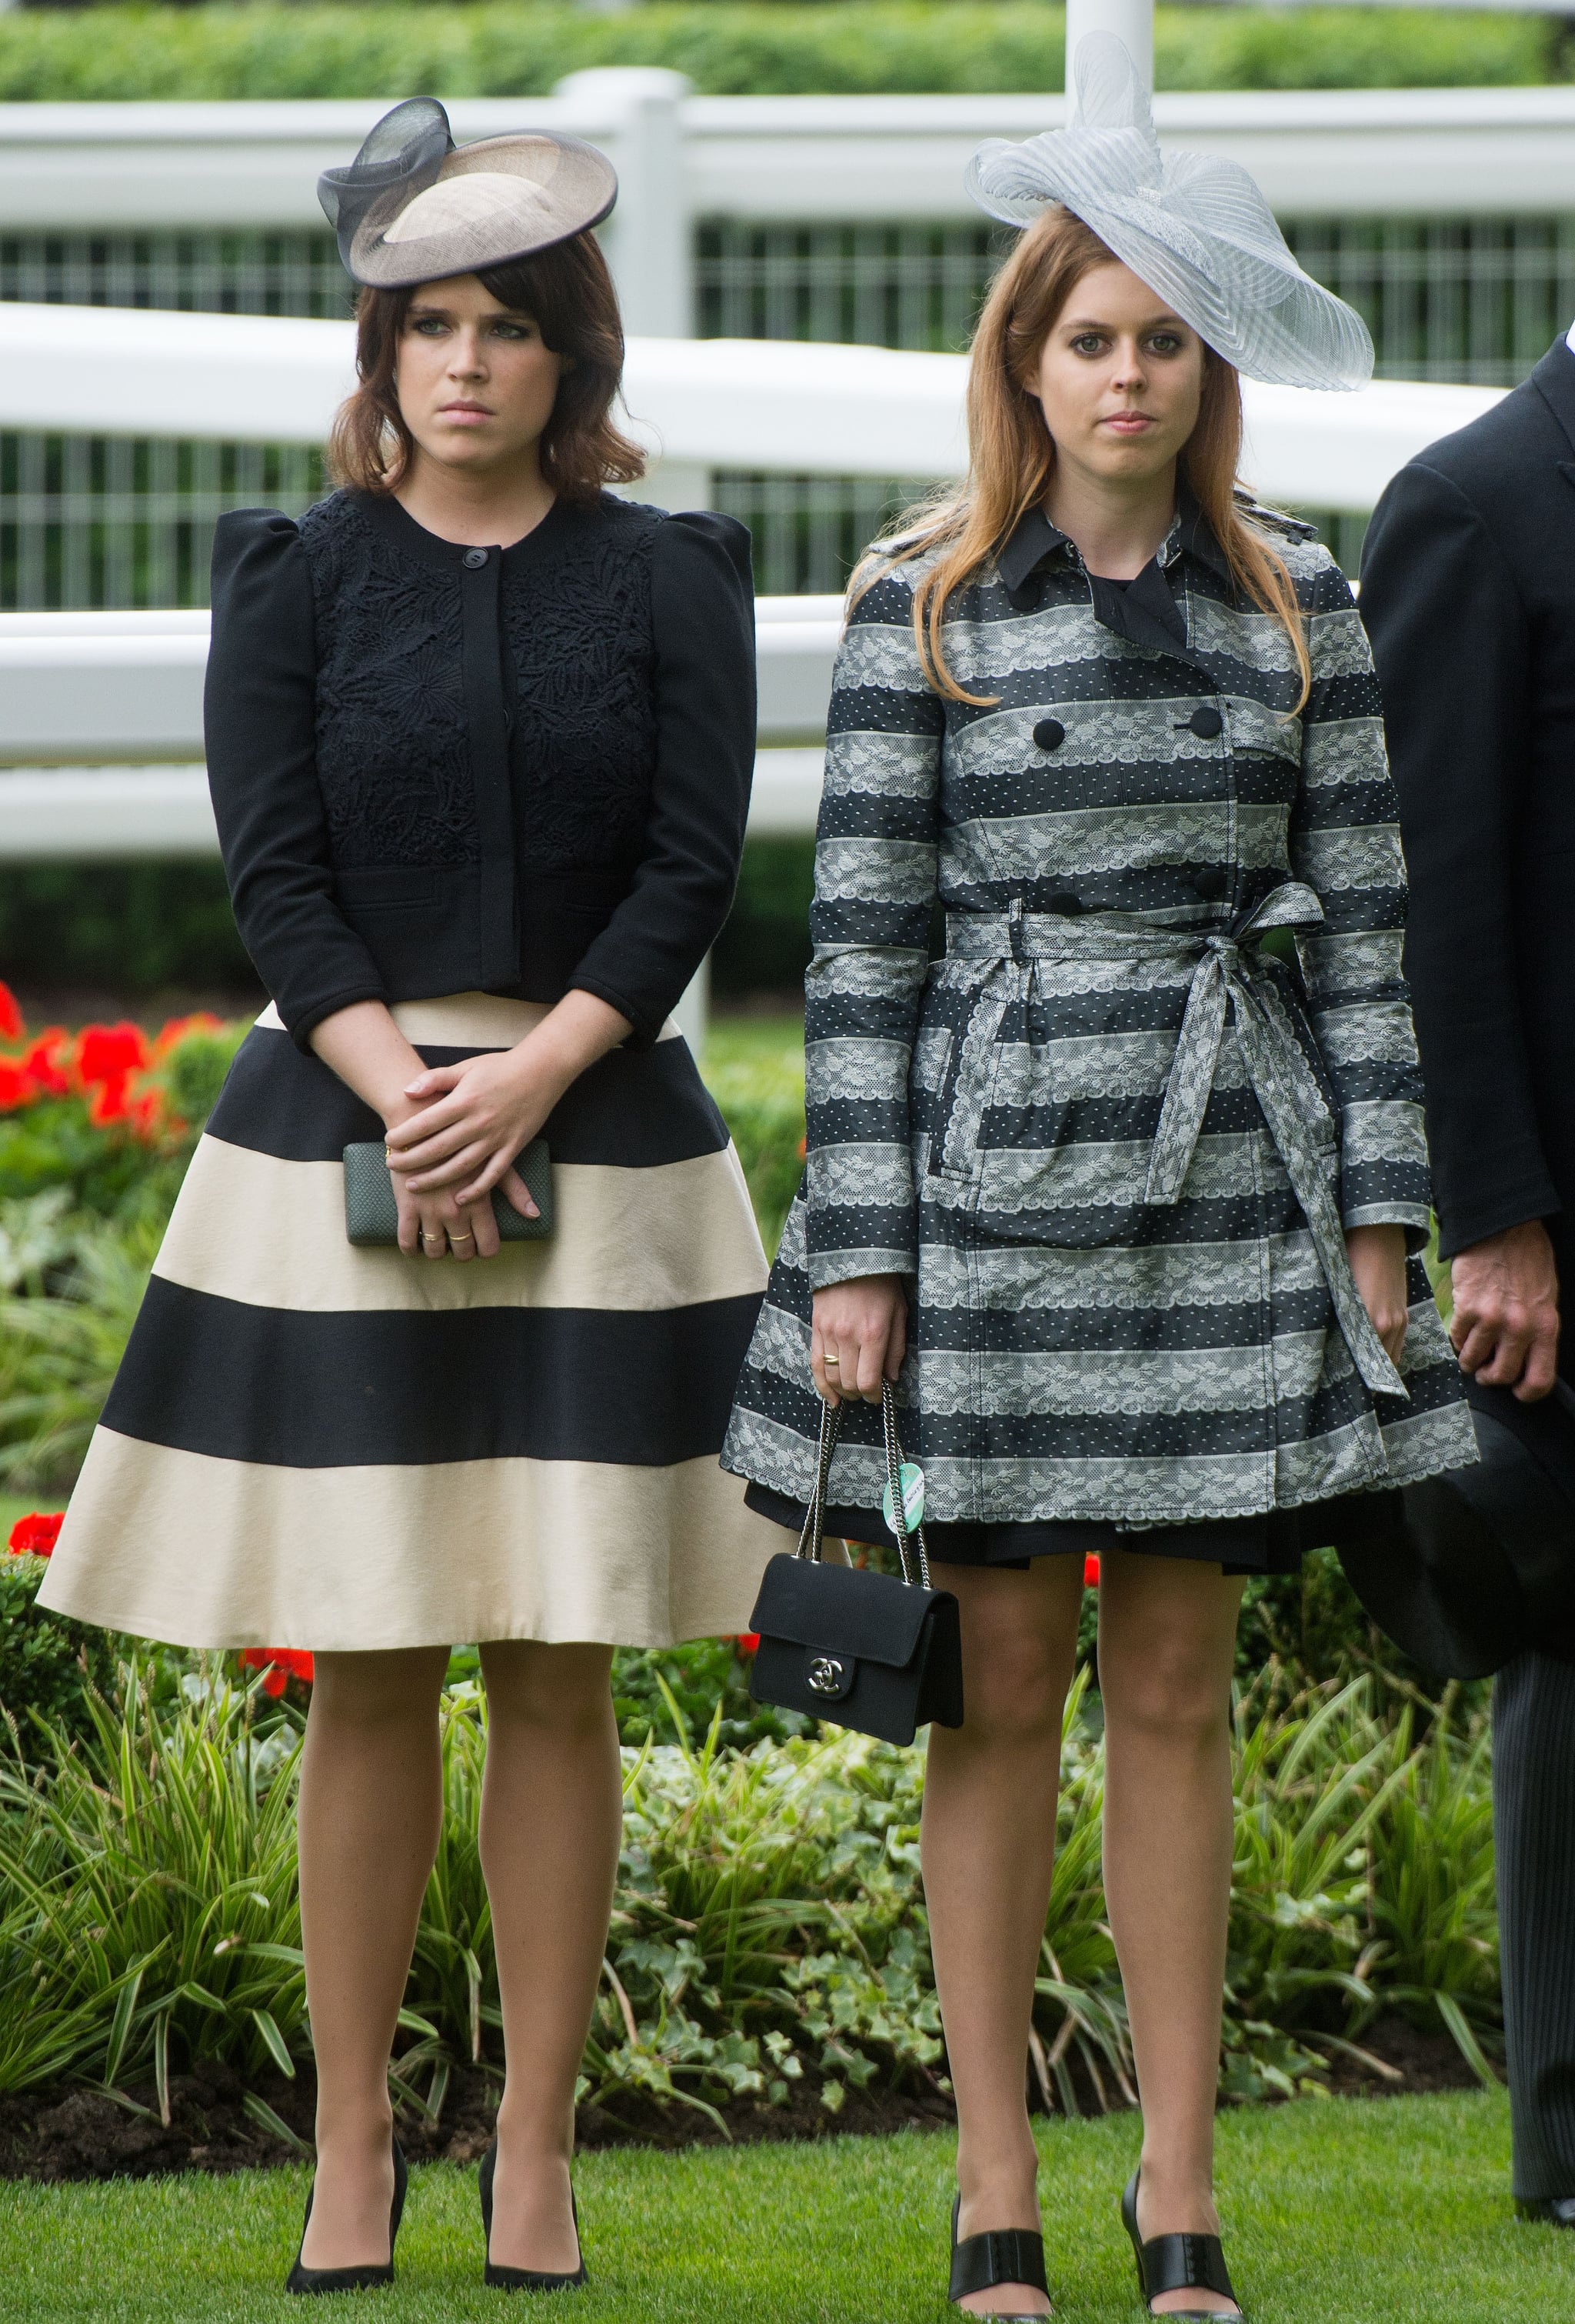 There's No Bag as Classic as a Chanel Chain Strap, Princess Beatrice of  York Hangs With the Duchess of Cambridge, but Her Style's on Another Level